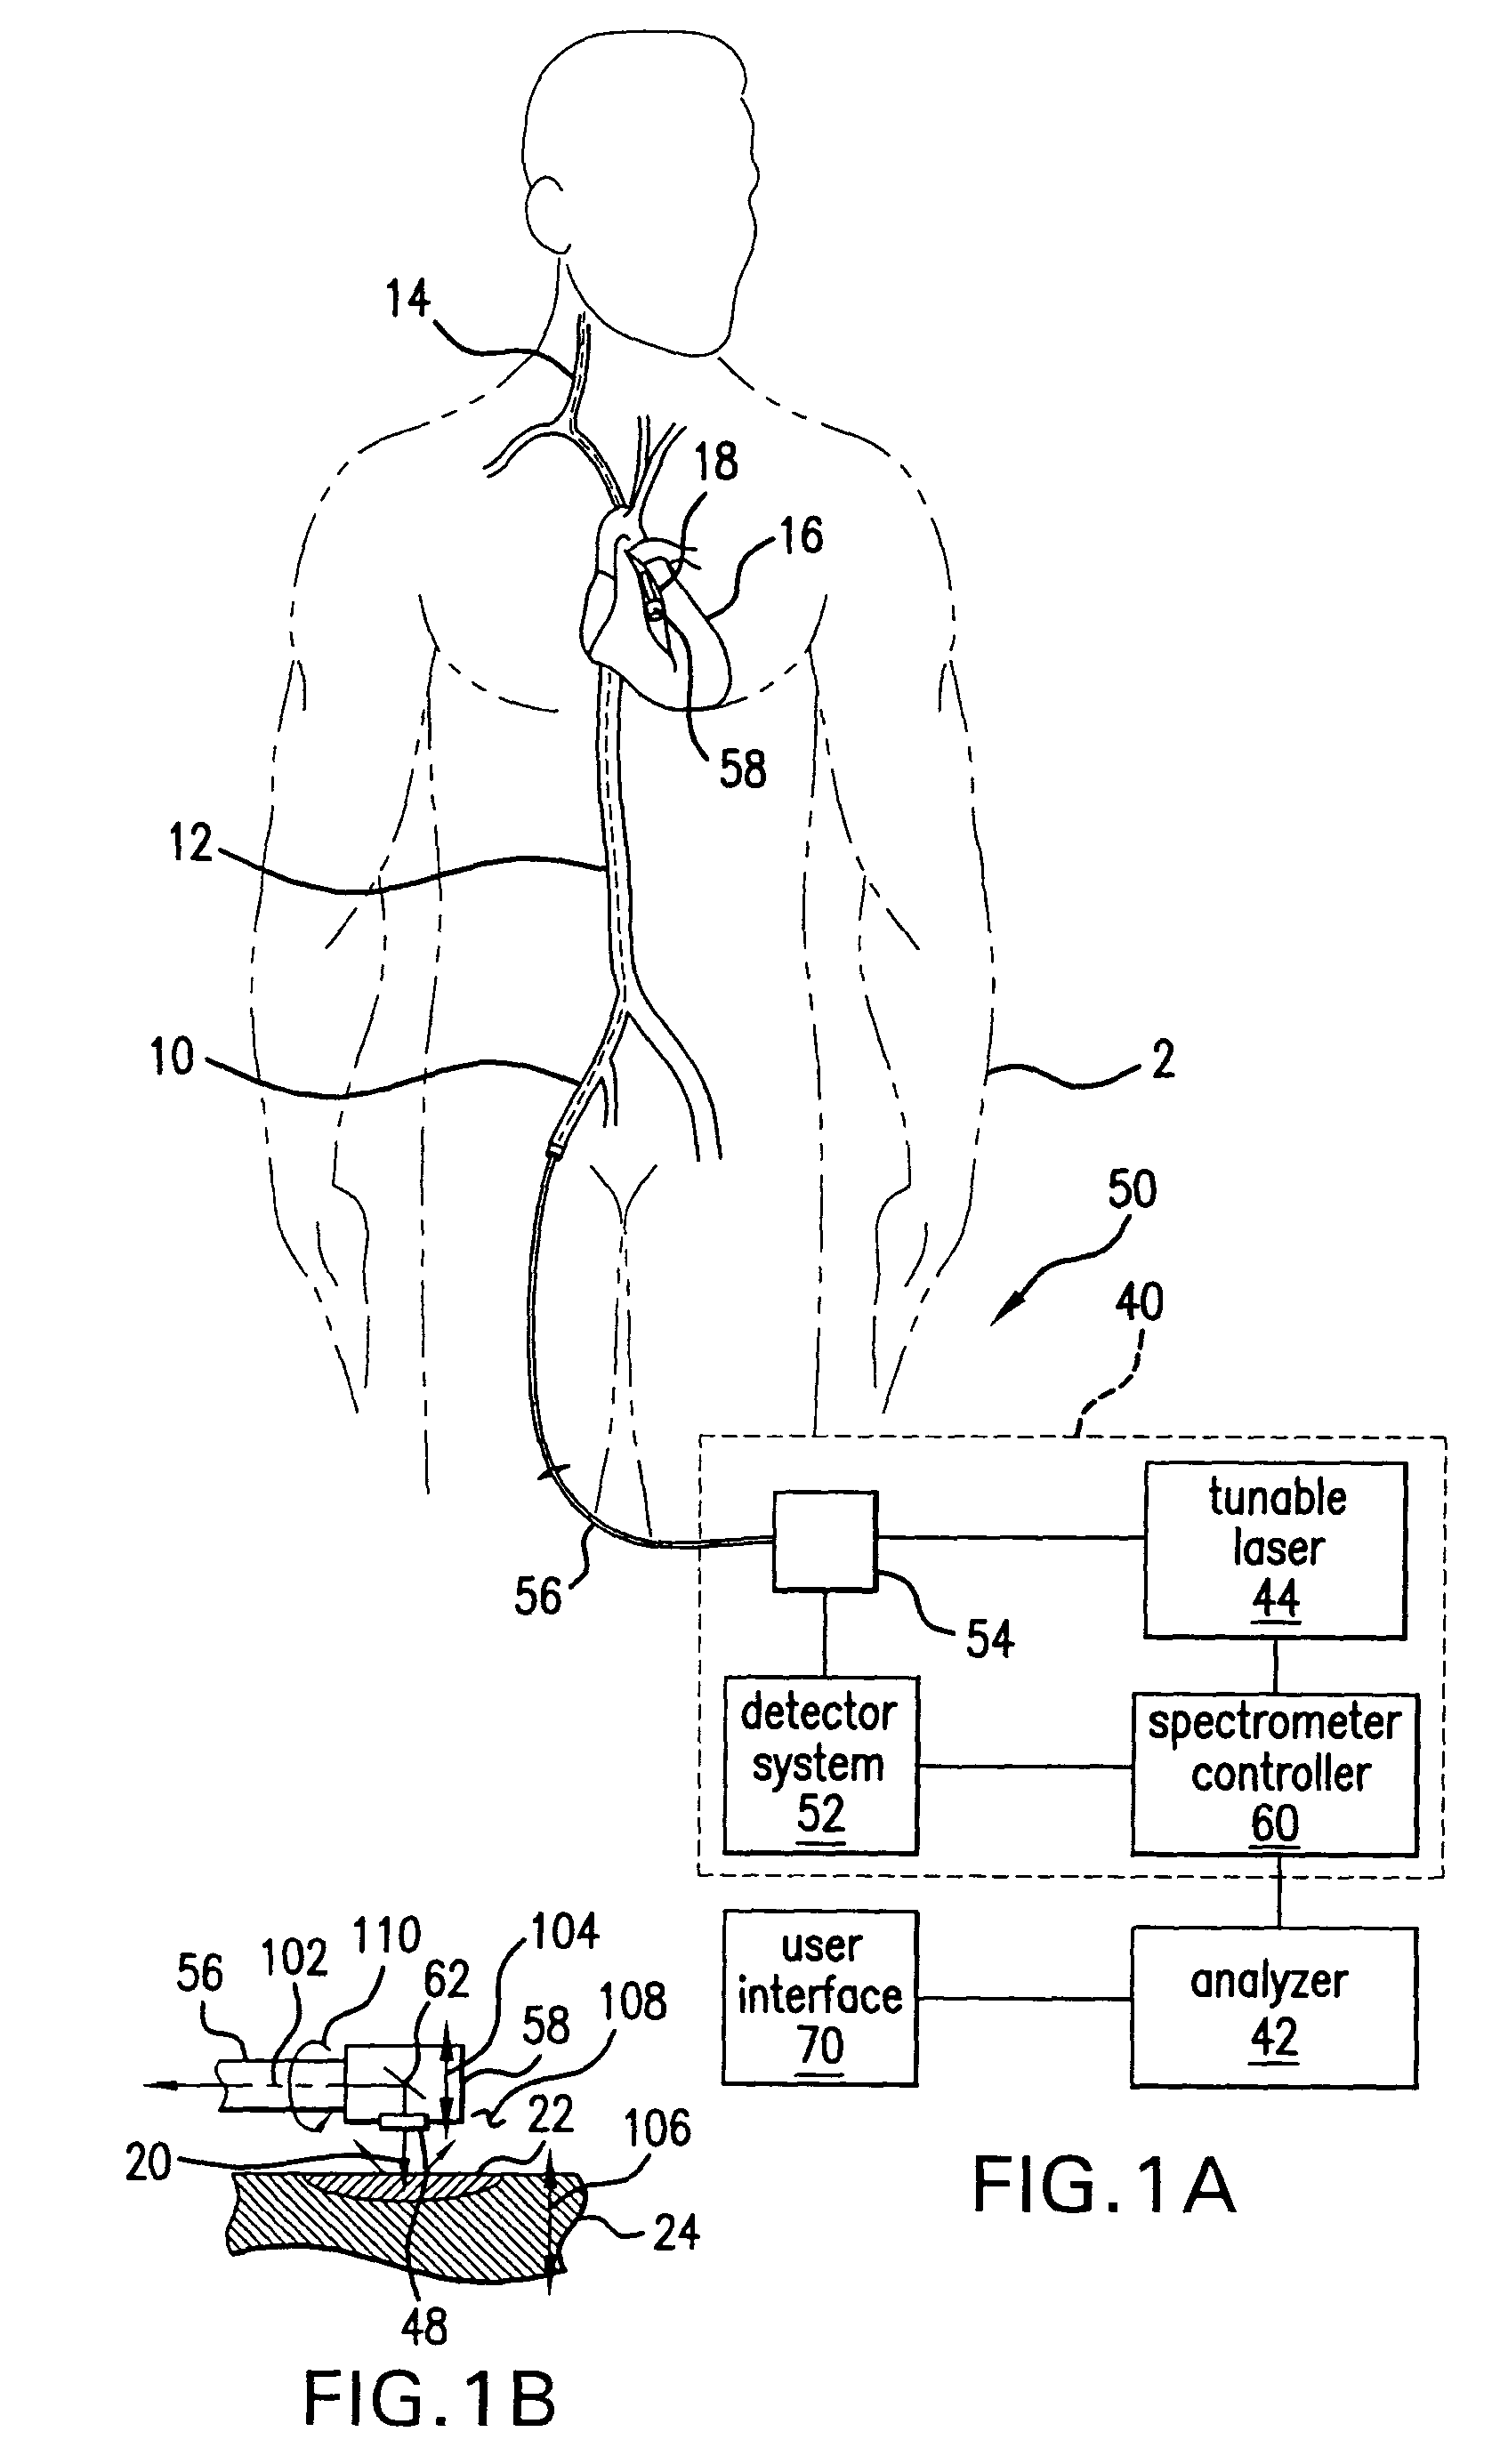 Method and system for spectral examination of vascular walls through blood during cardiac motion